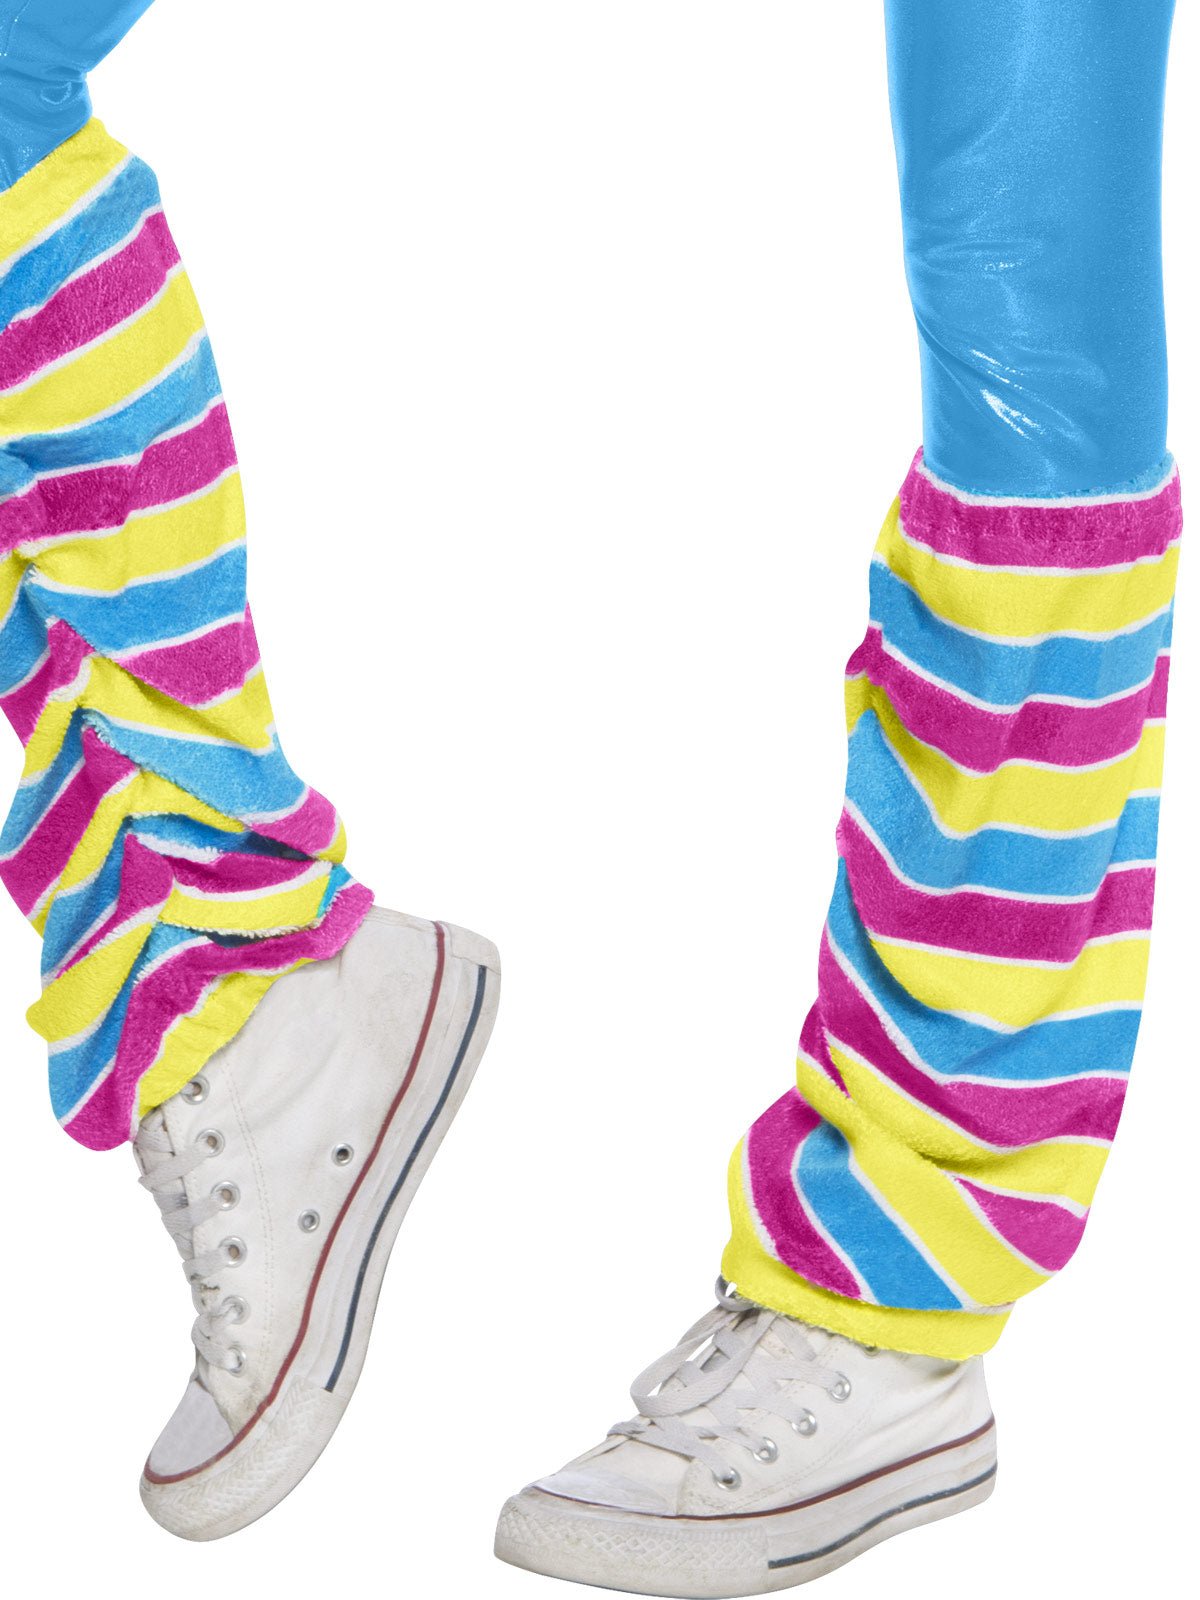 Terry Cloth Leg Warmers with Colored Stripes